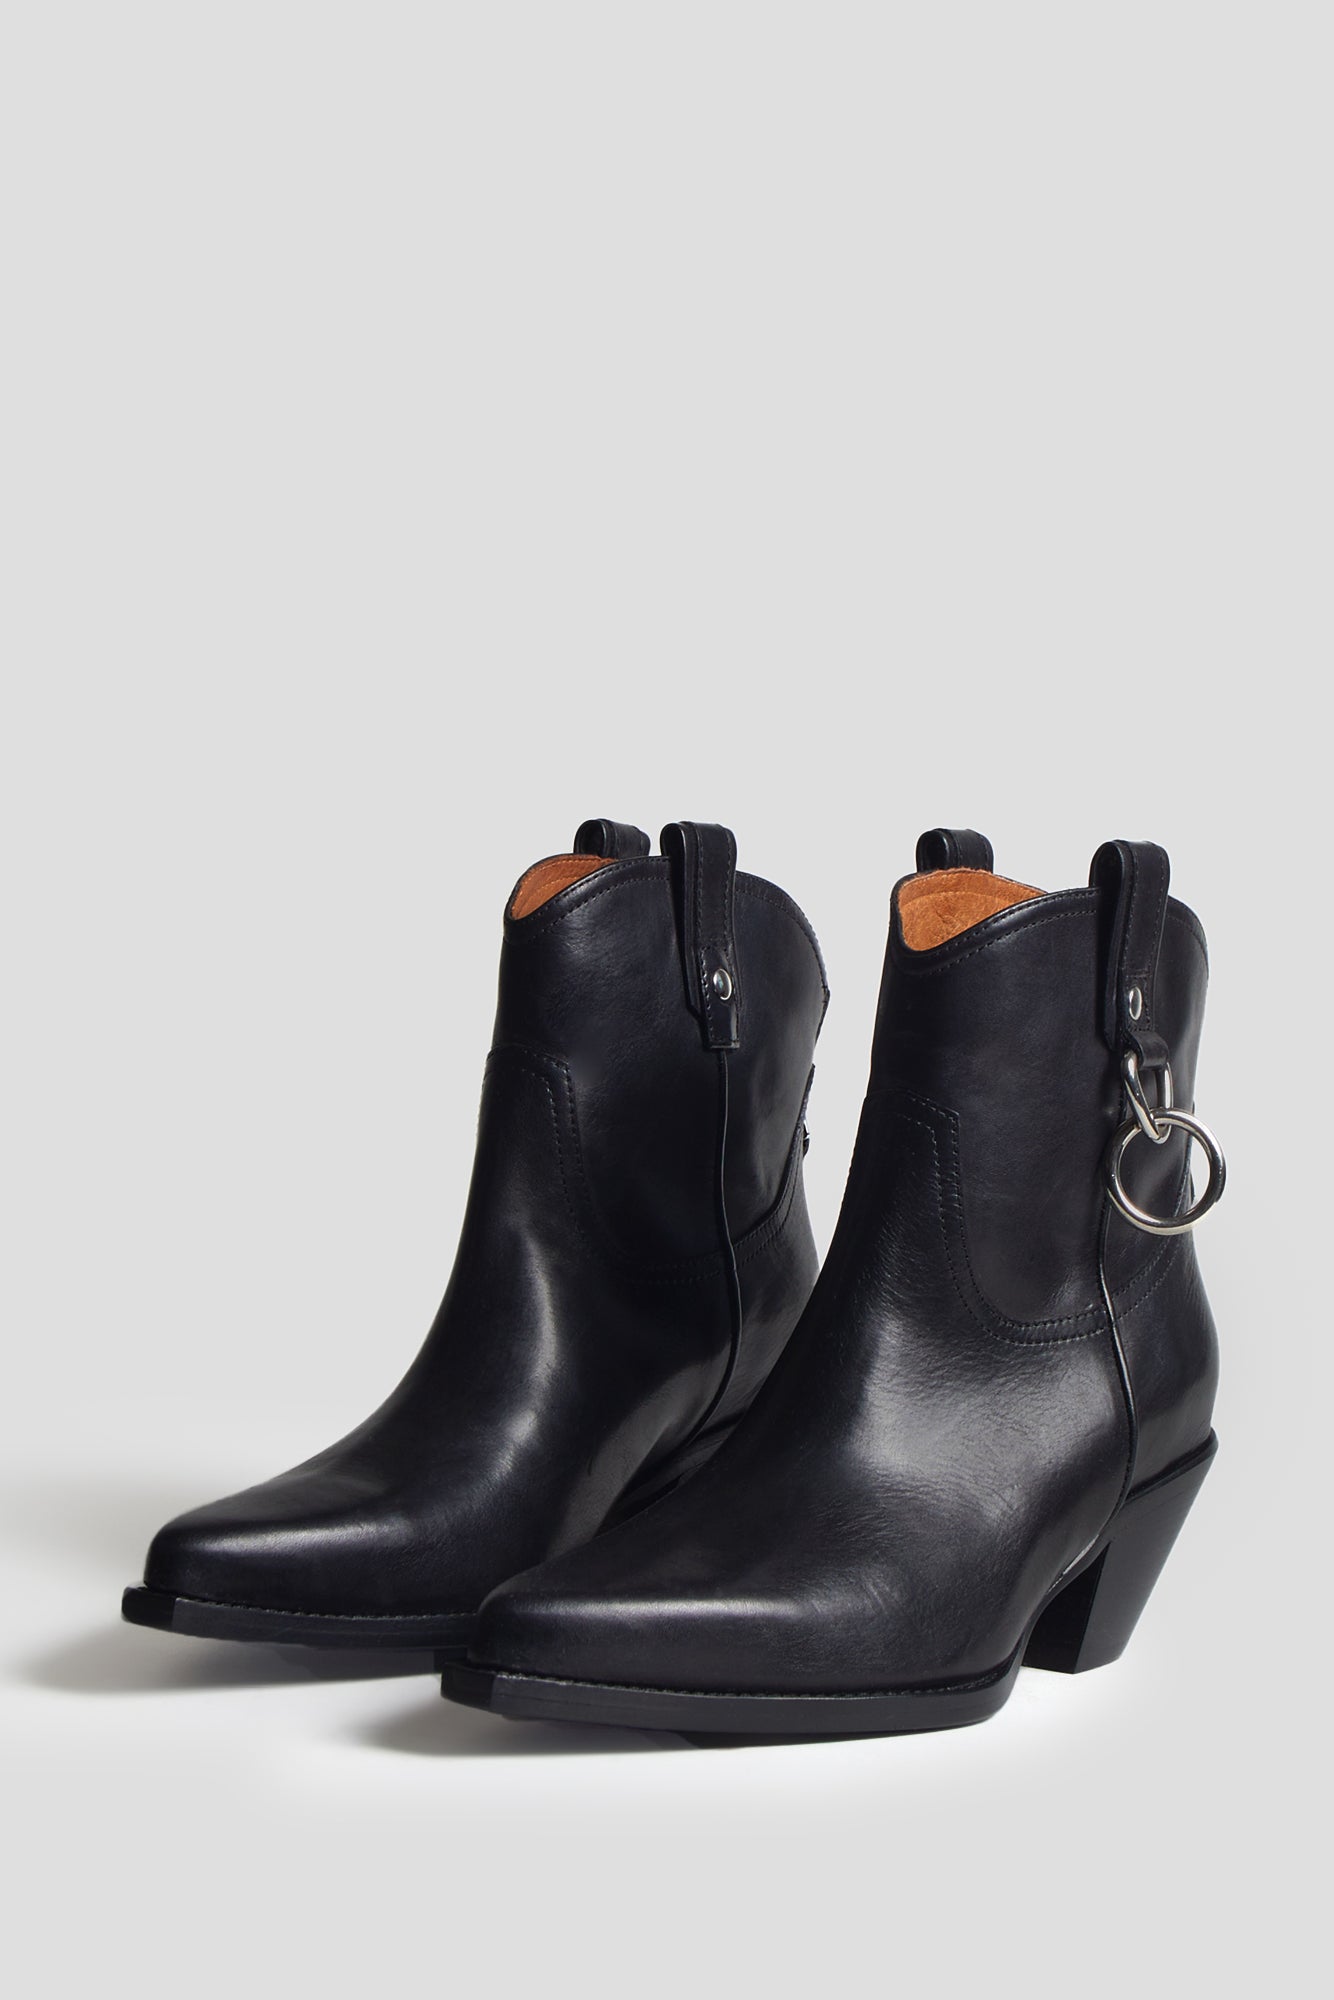 RINGED ANKLE COWBOY BOOT - BLACK